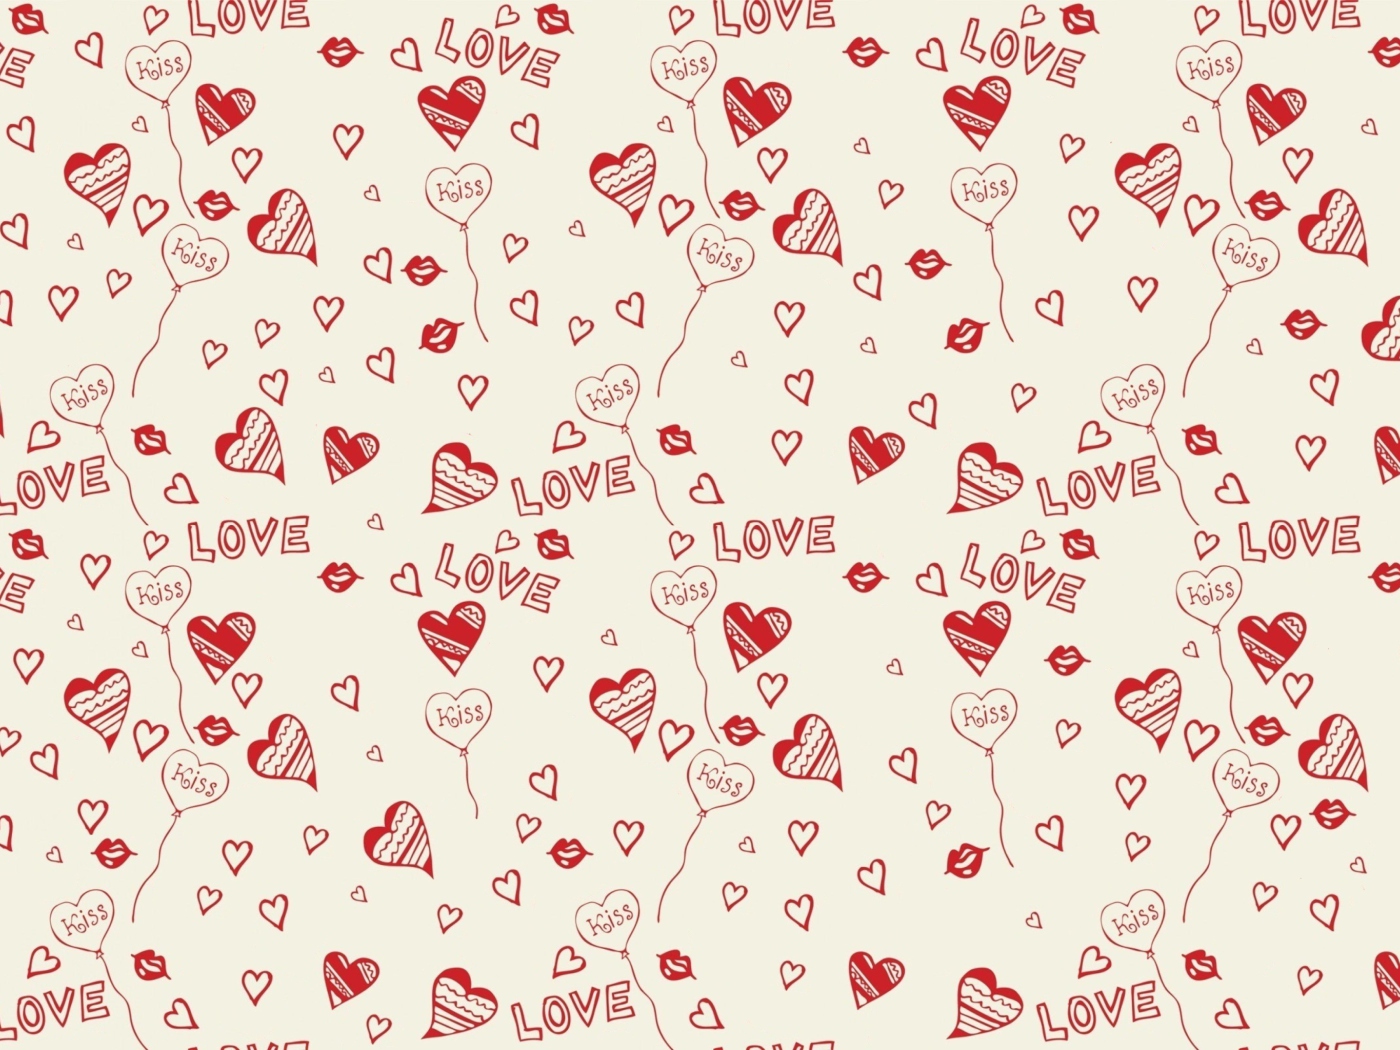 Love And Kiss wallpaper 1400x1050